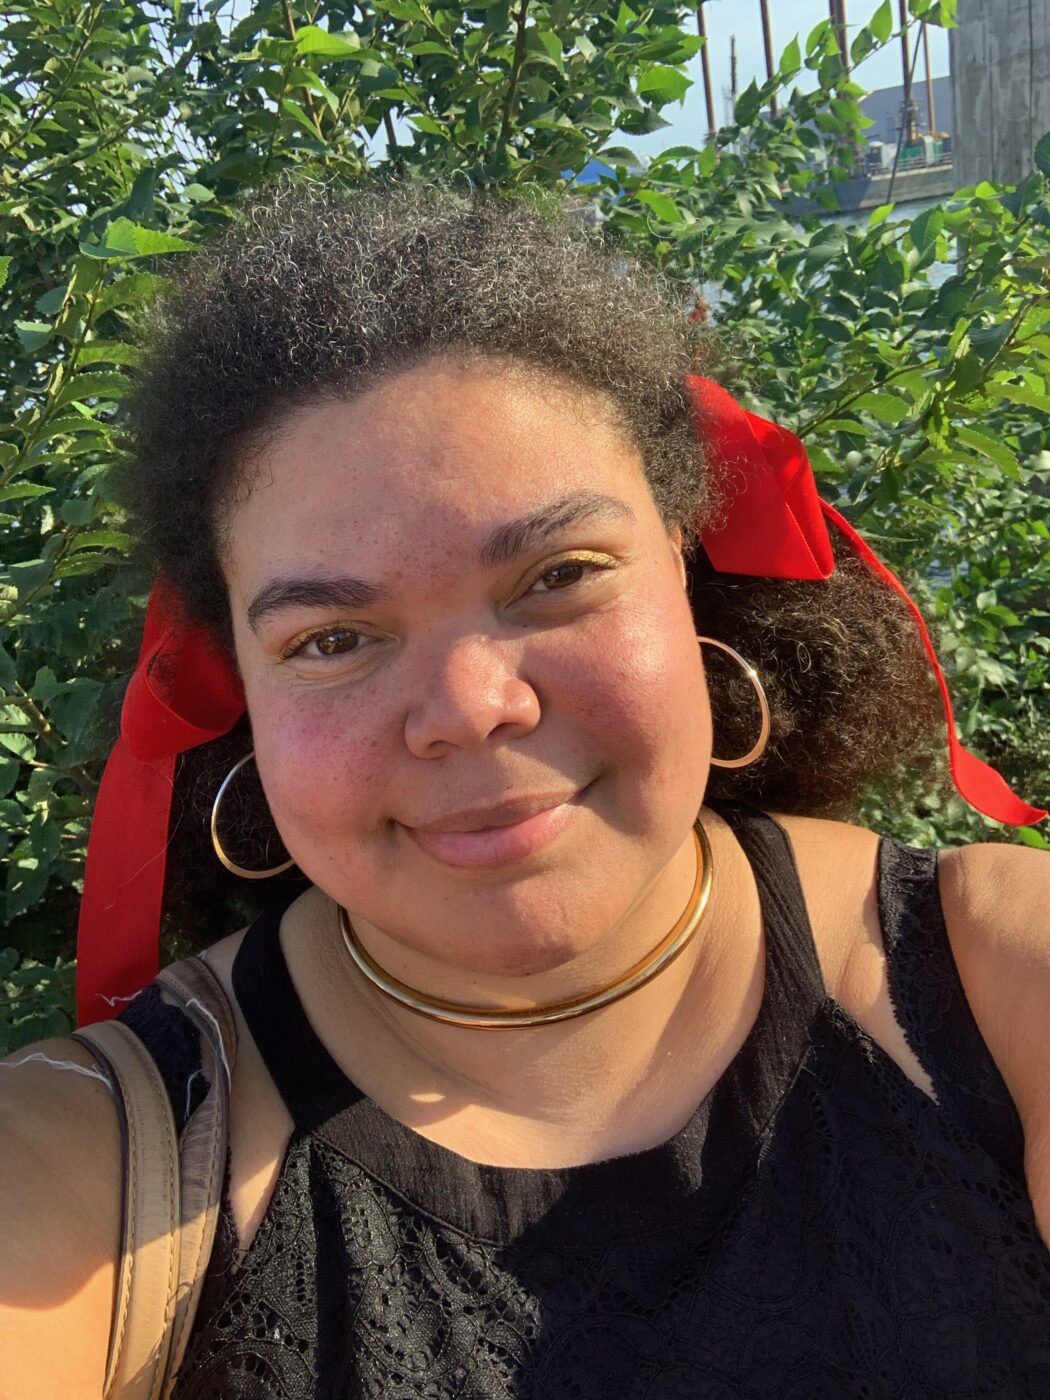 Selfie of a woman outside looking into the camera. She has brown curly hair with a red ribbon tied in the back and big gold hoop earrings.